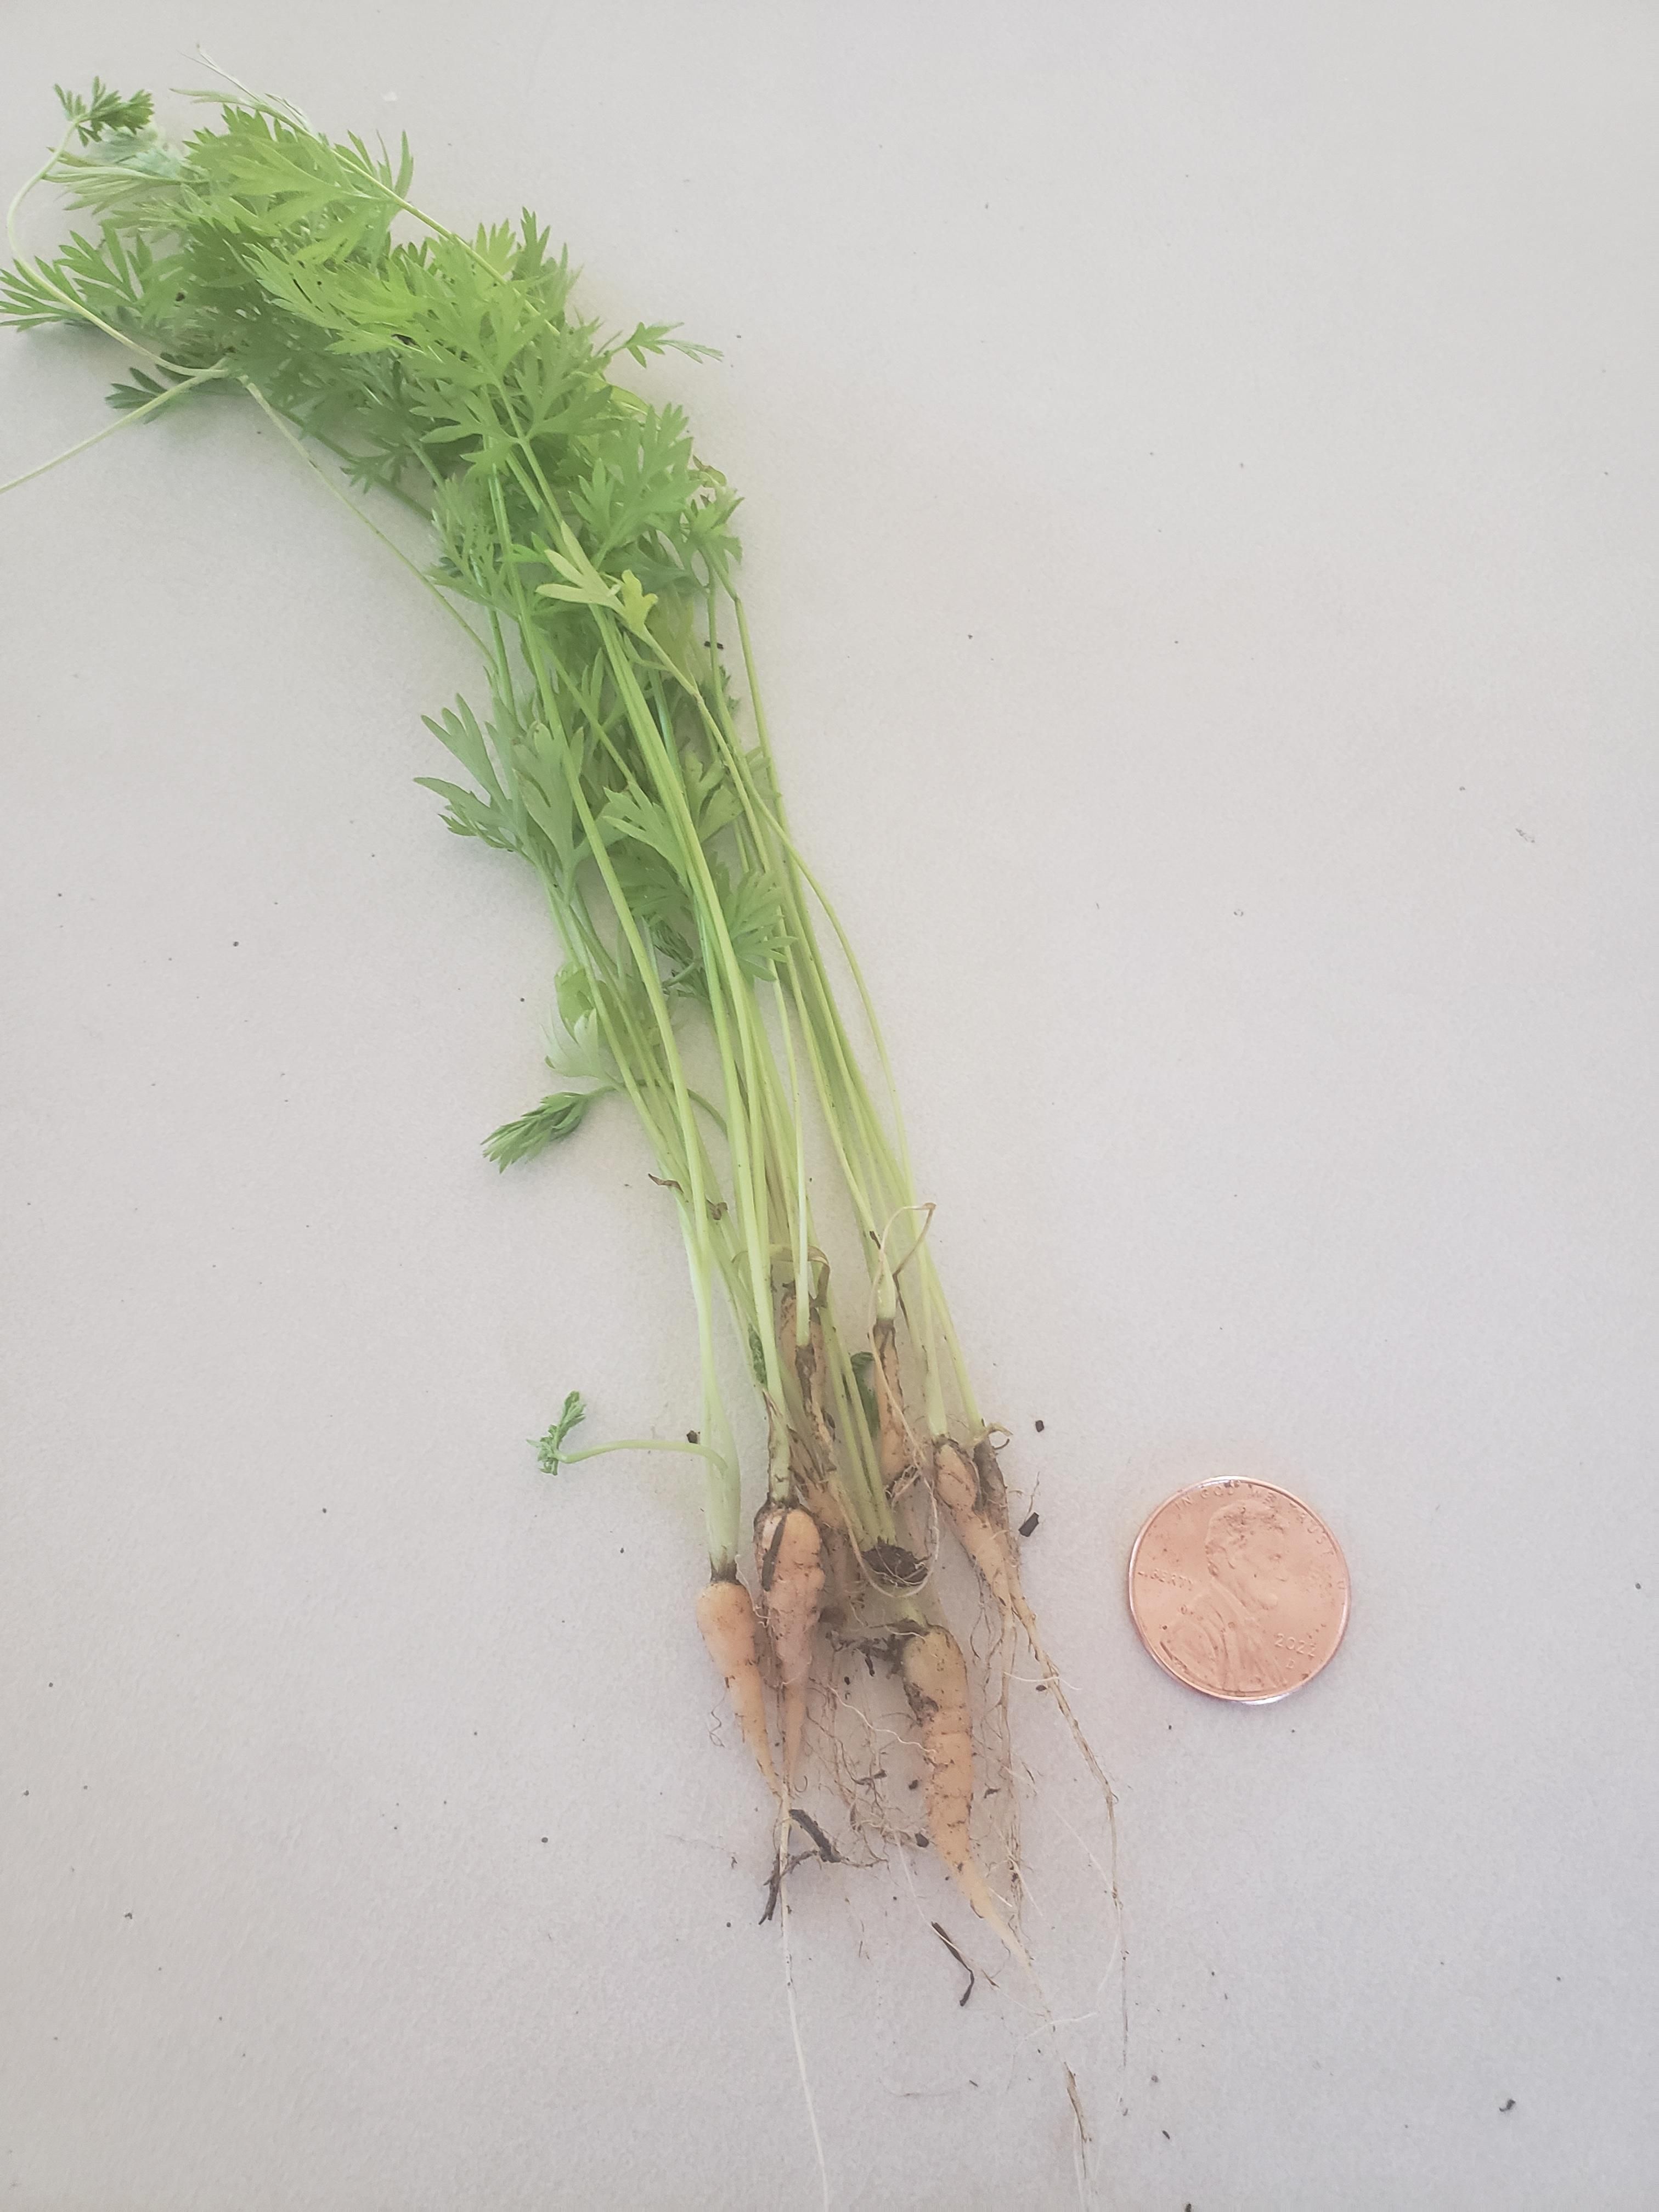 My wife grew these carrots....penny for scale